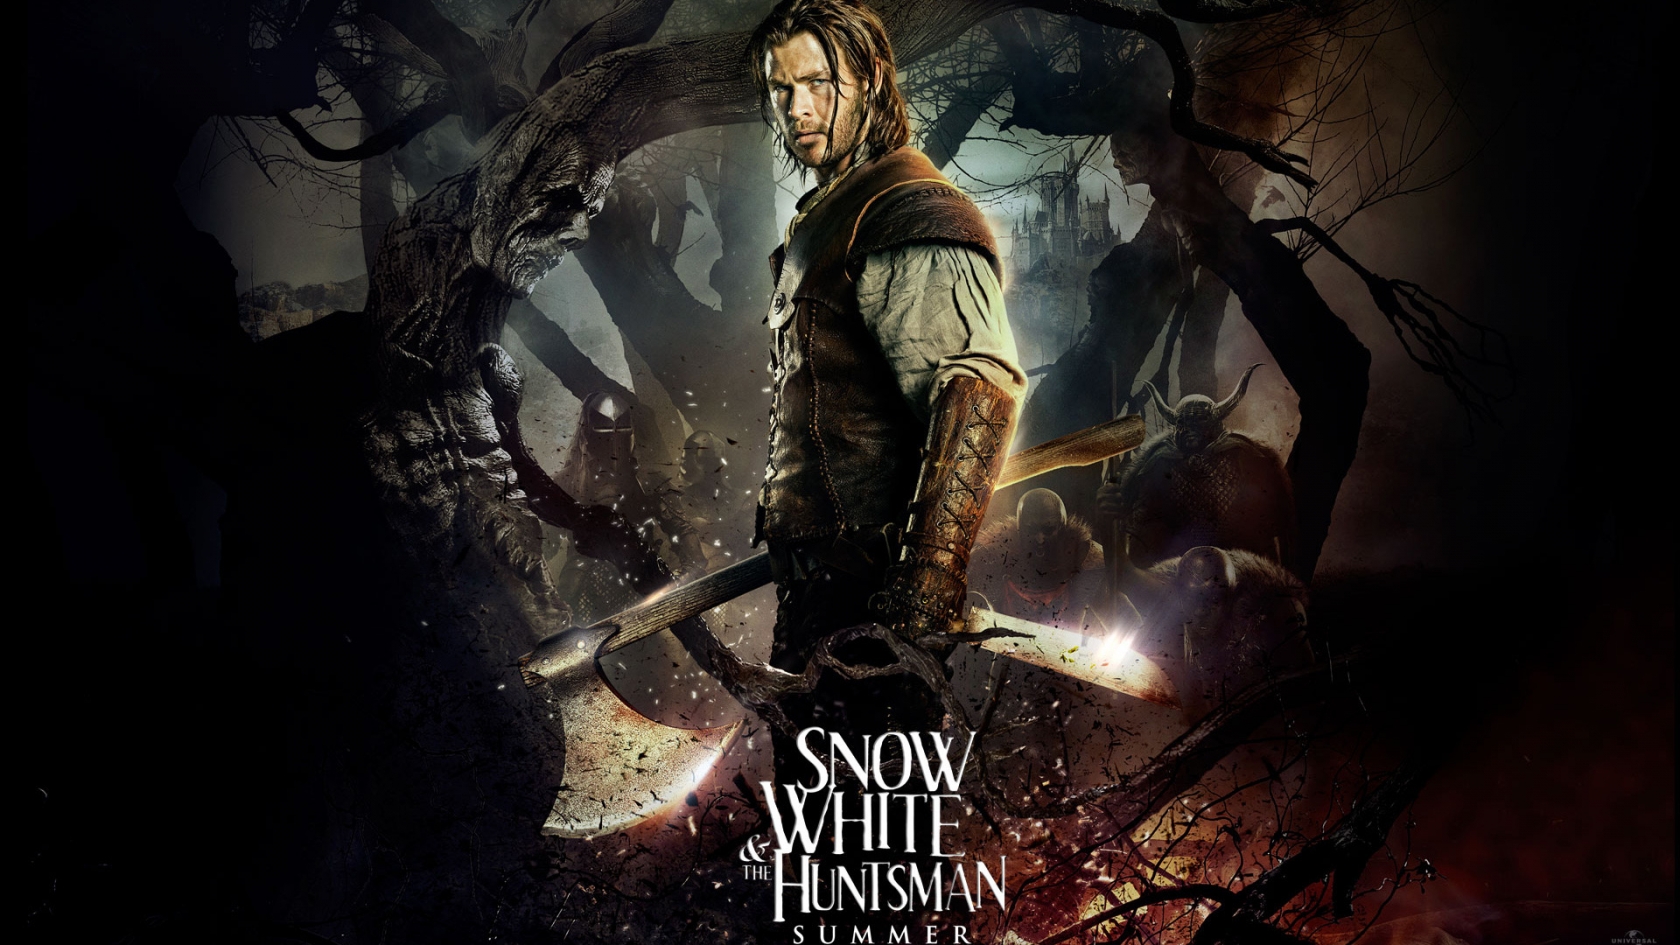 The Huntsman in Snow White Movie 2012 for 1680 x 945 HDTV resolution